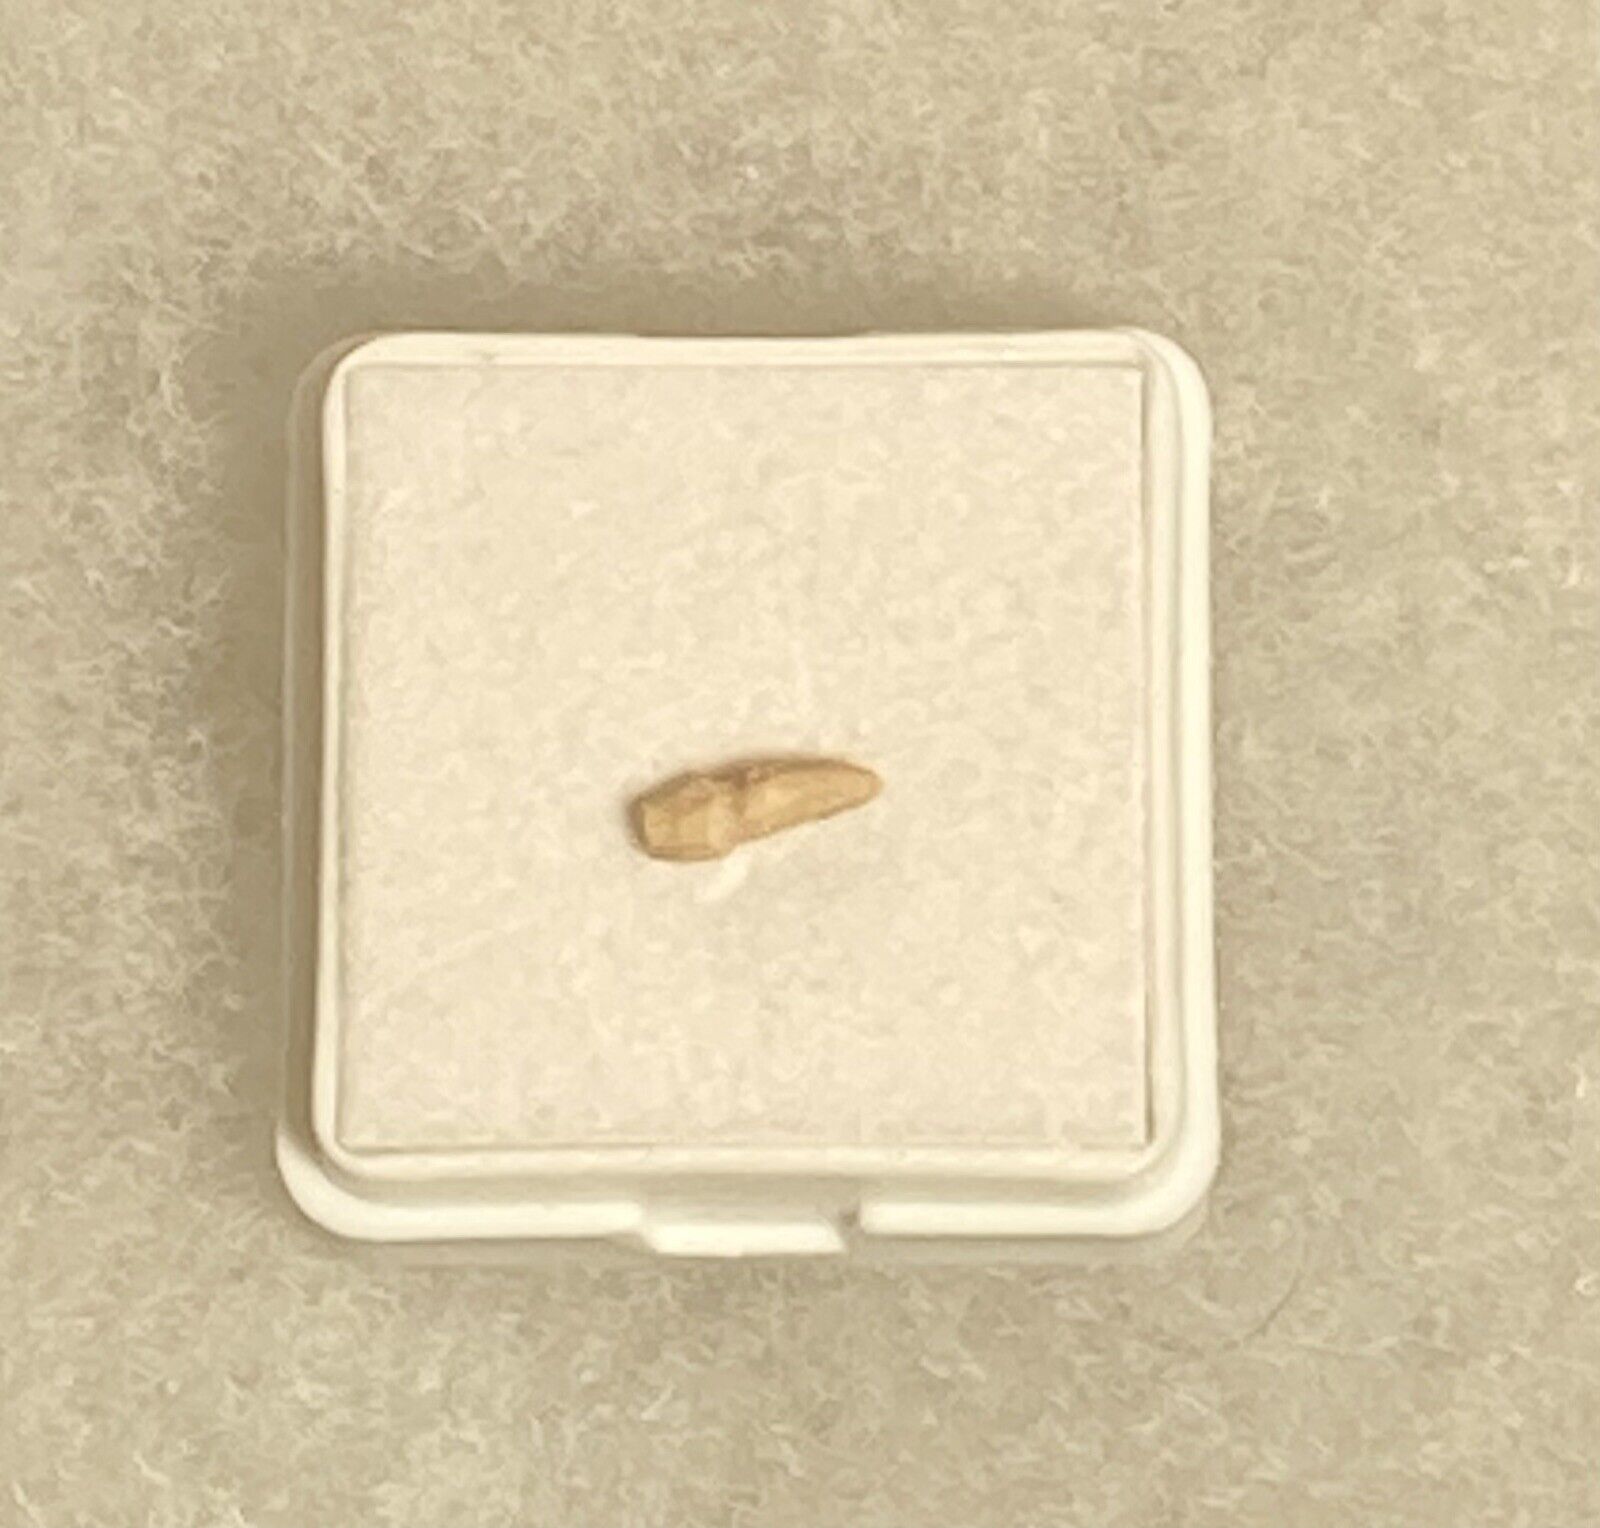 Porpoise Tooth from Shark Tooth Hill - Ernst Quarry: Bakersfield, California